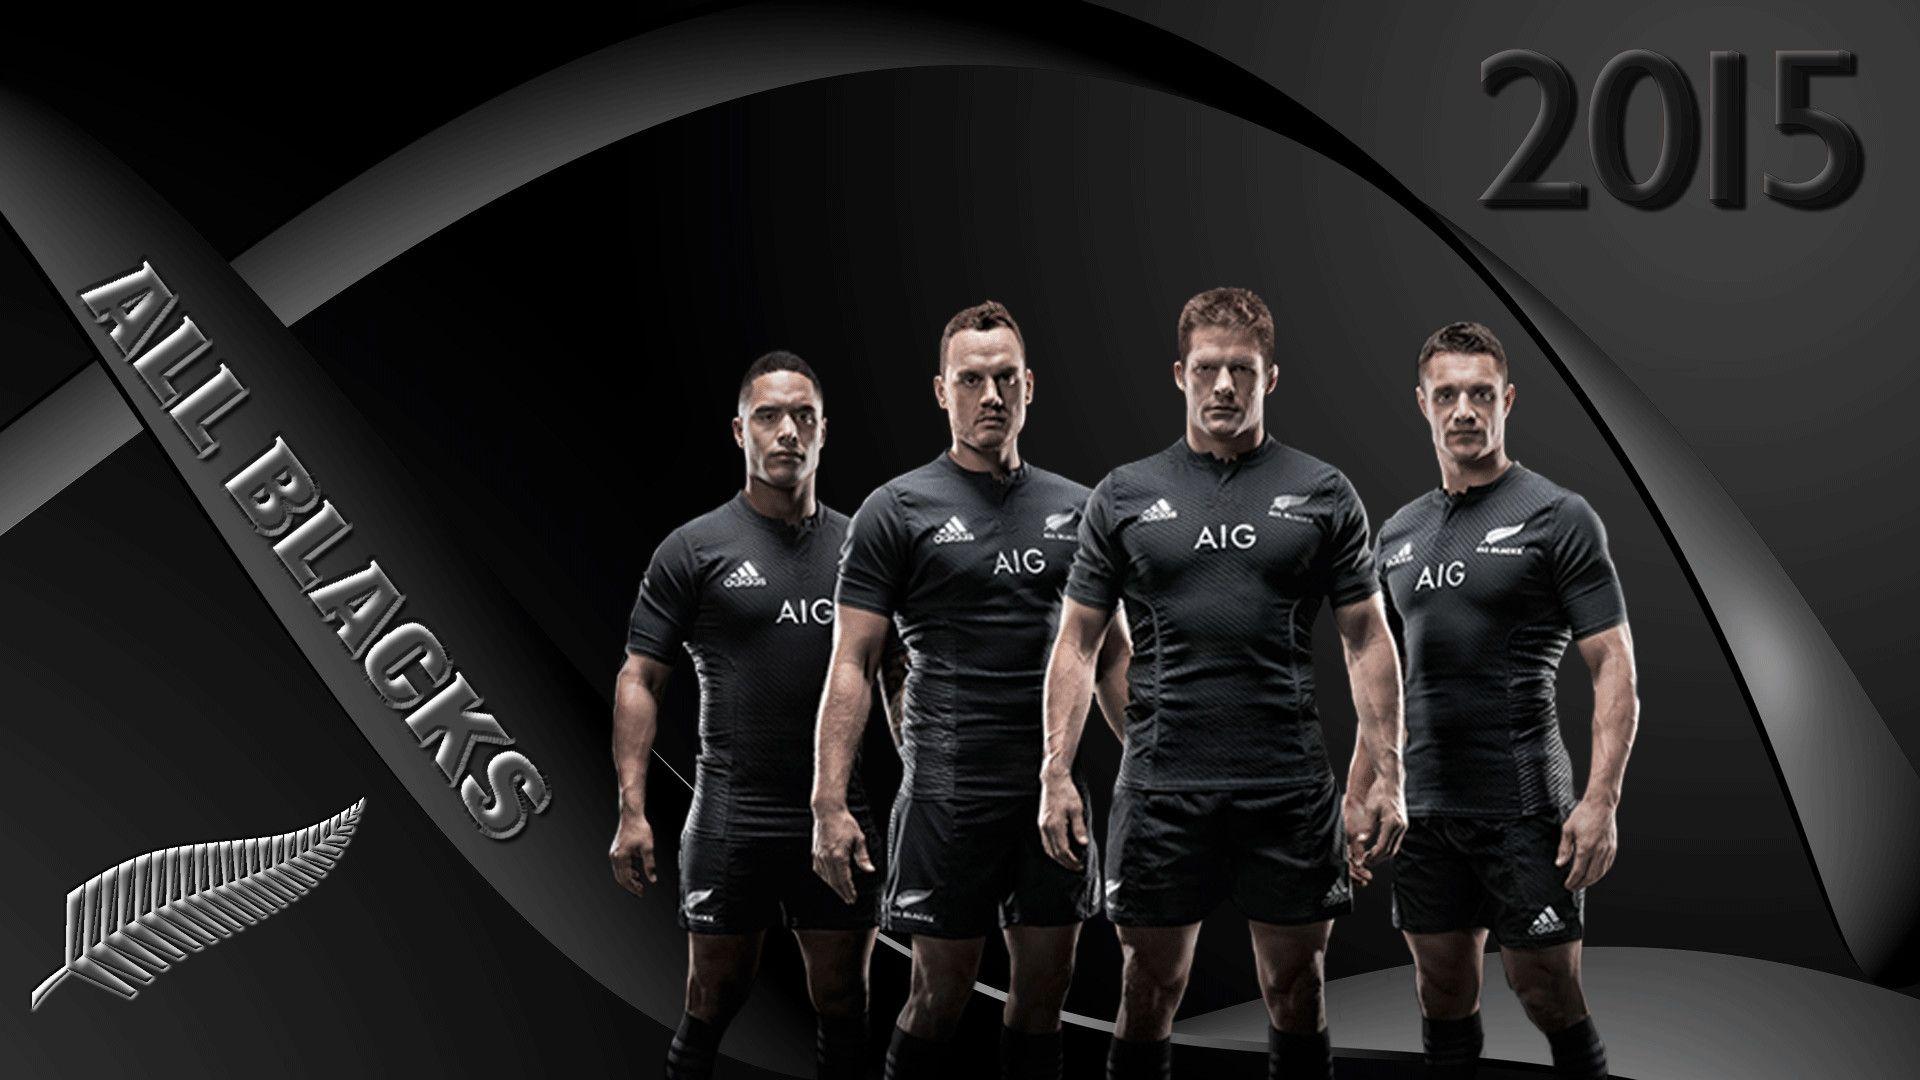 Awesome All Black Rugby Wallpaper Free. The Black Posters